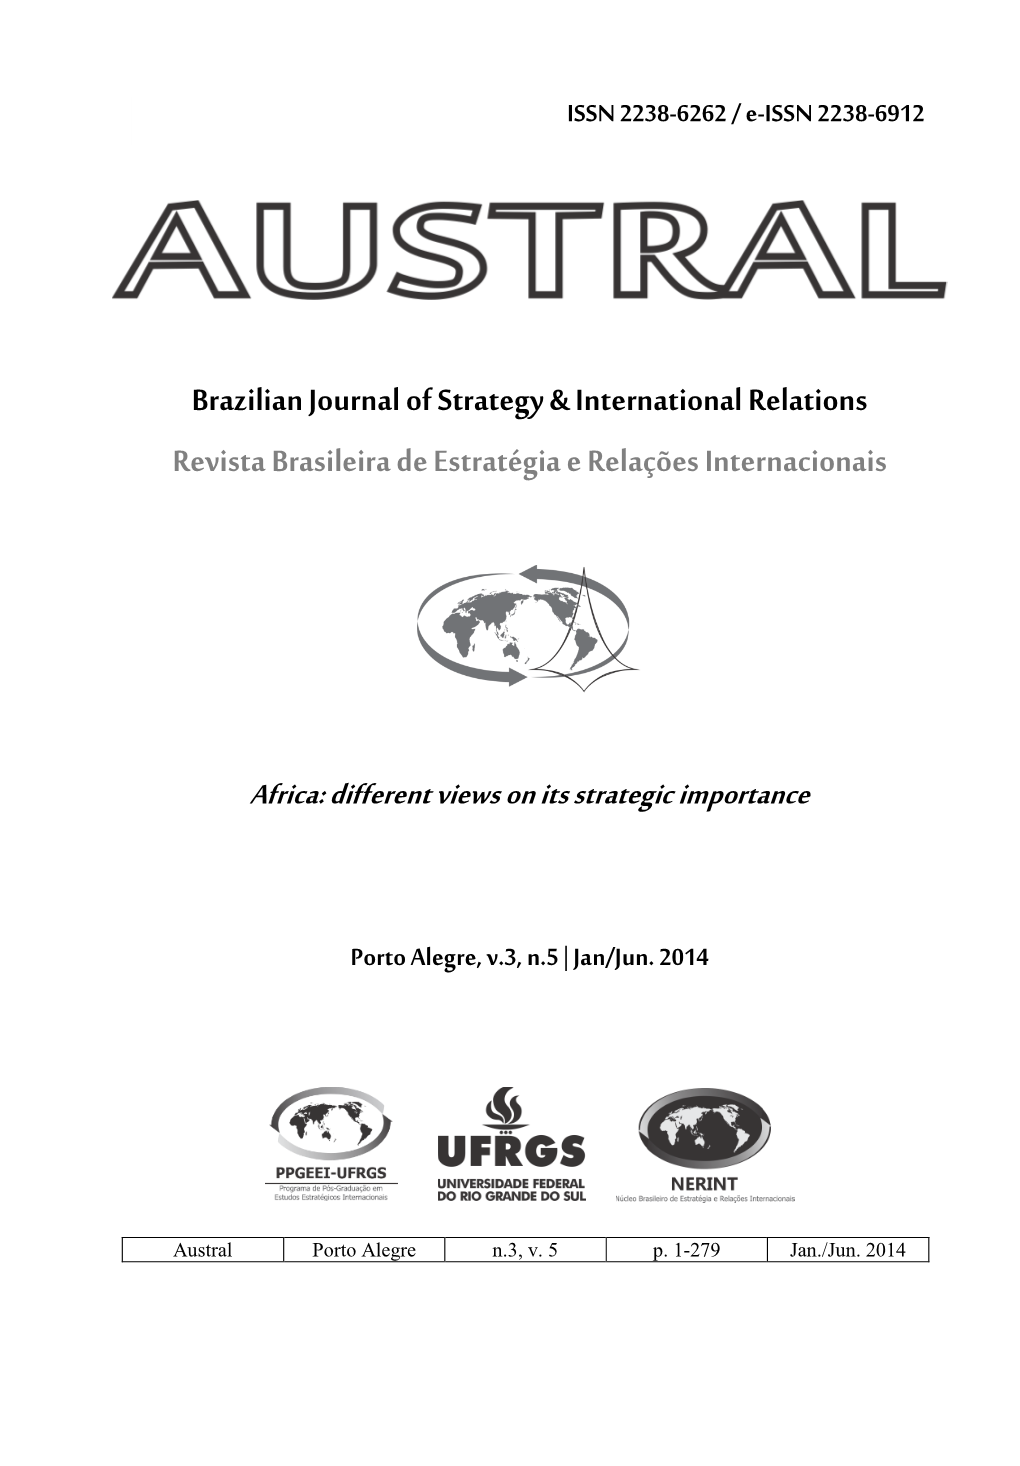 AUSTRAL Brazilian Journal of Strategy and International Relations